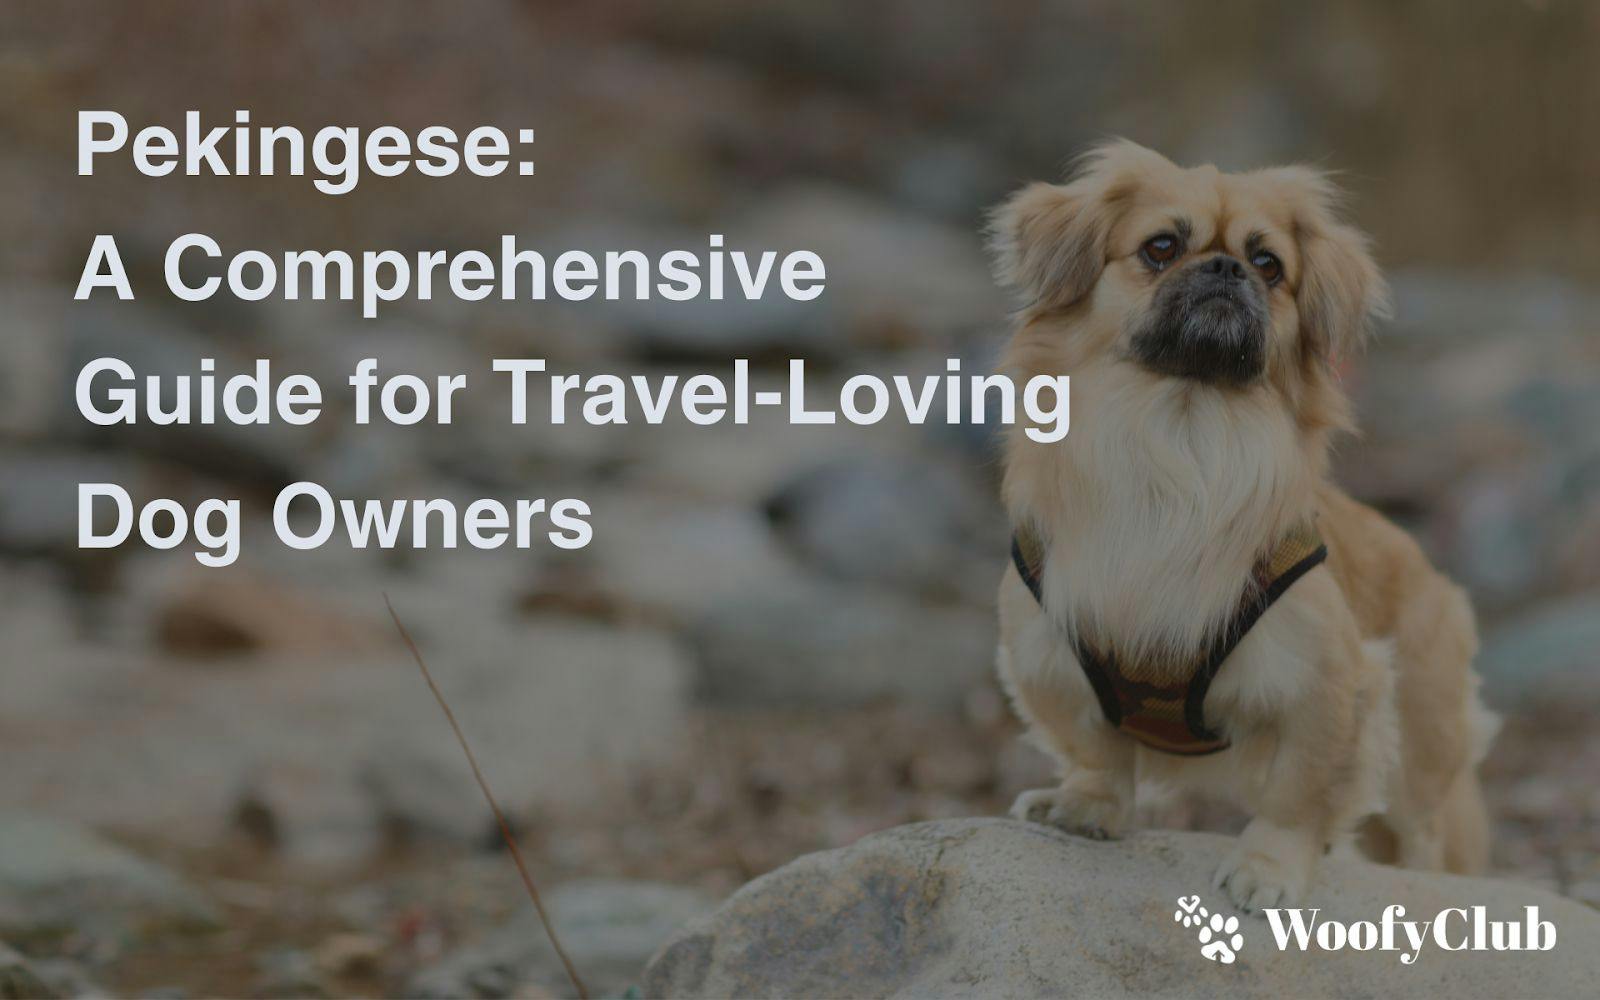 Pekingese: A Comprehensive Guide For Travel-Loving Dog Owners